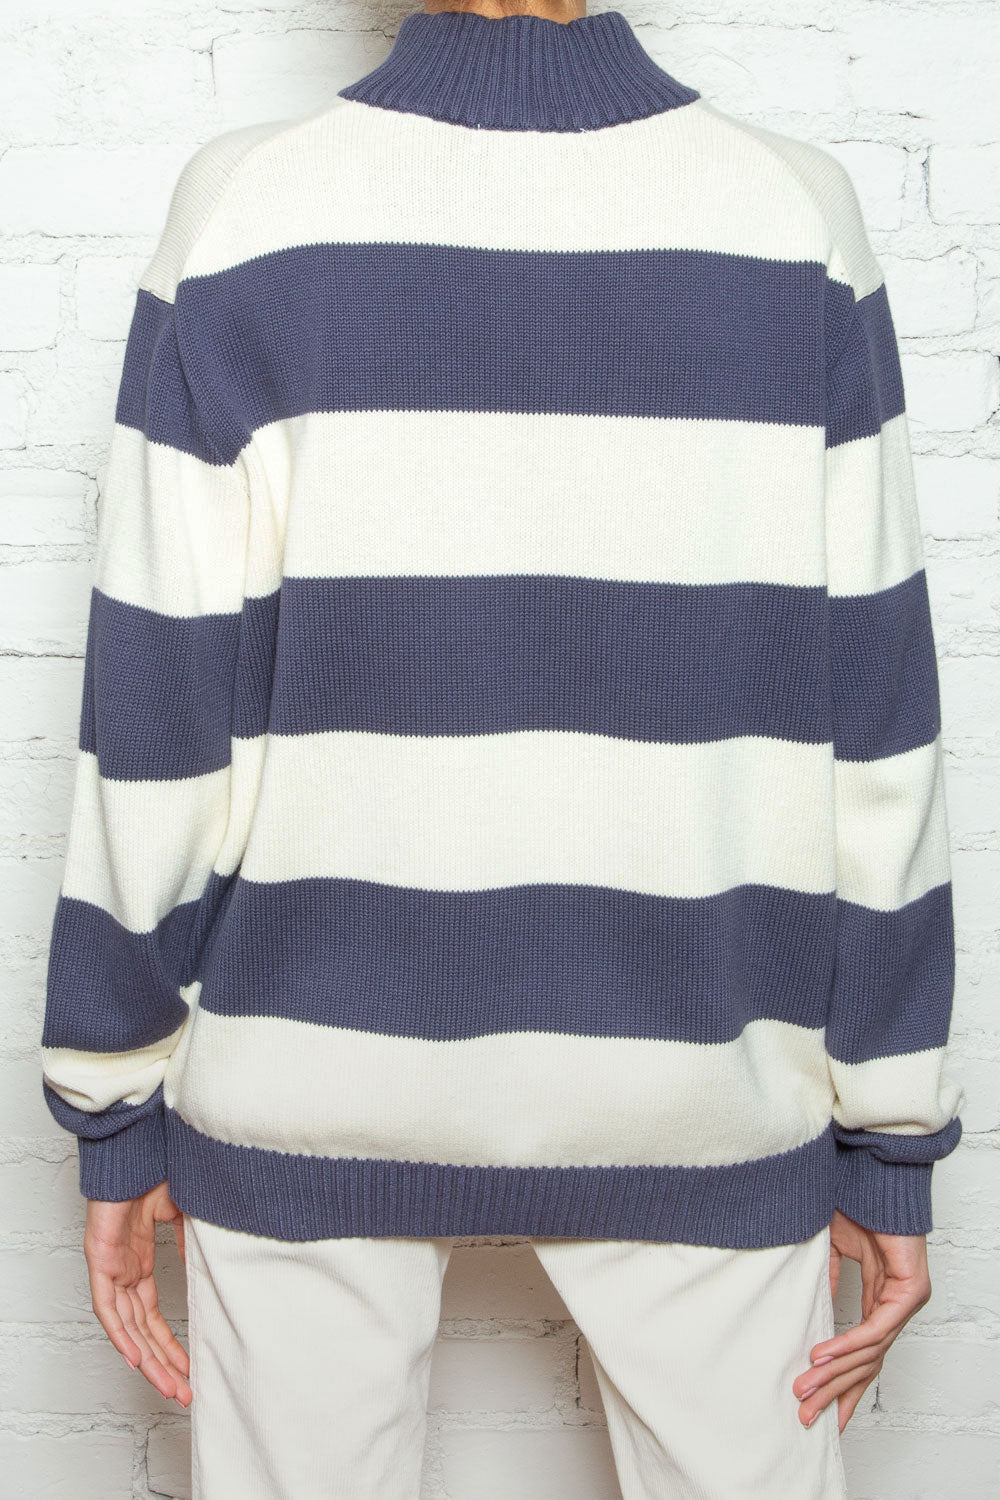 Ivory with Blue Stripes / Oversized Fit